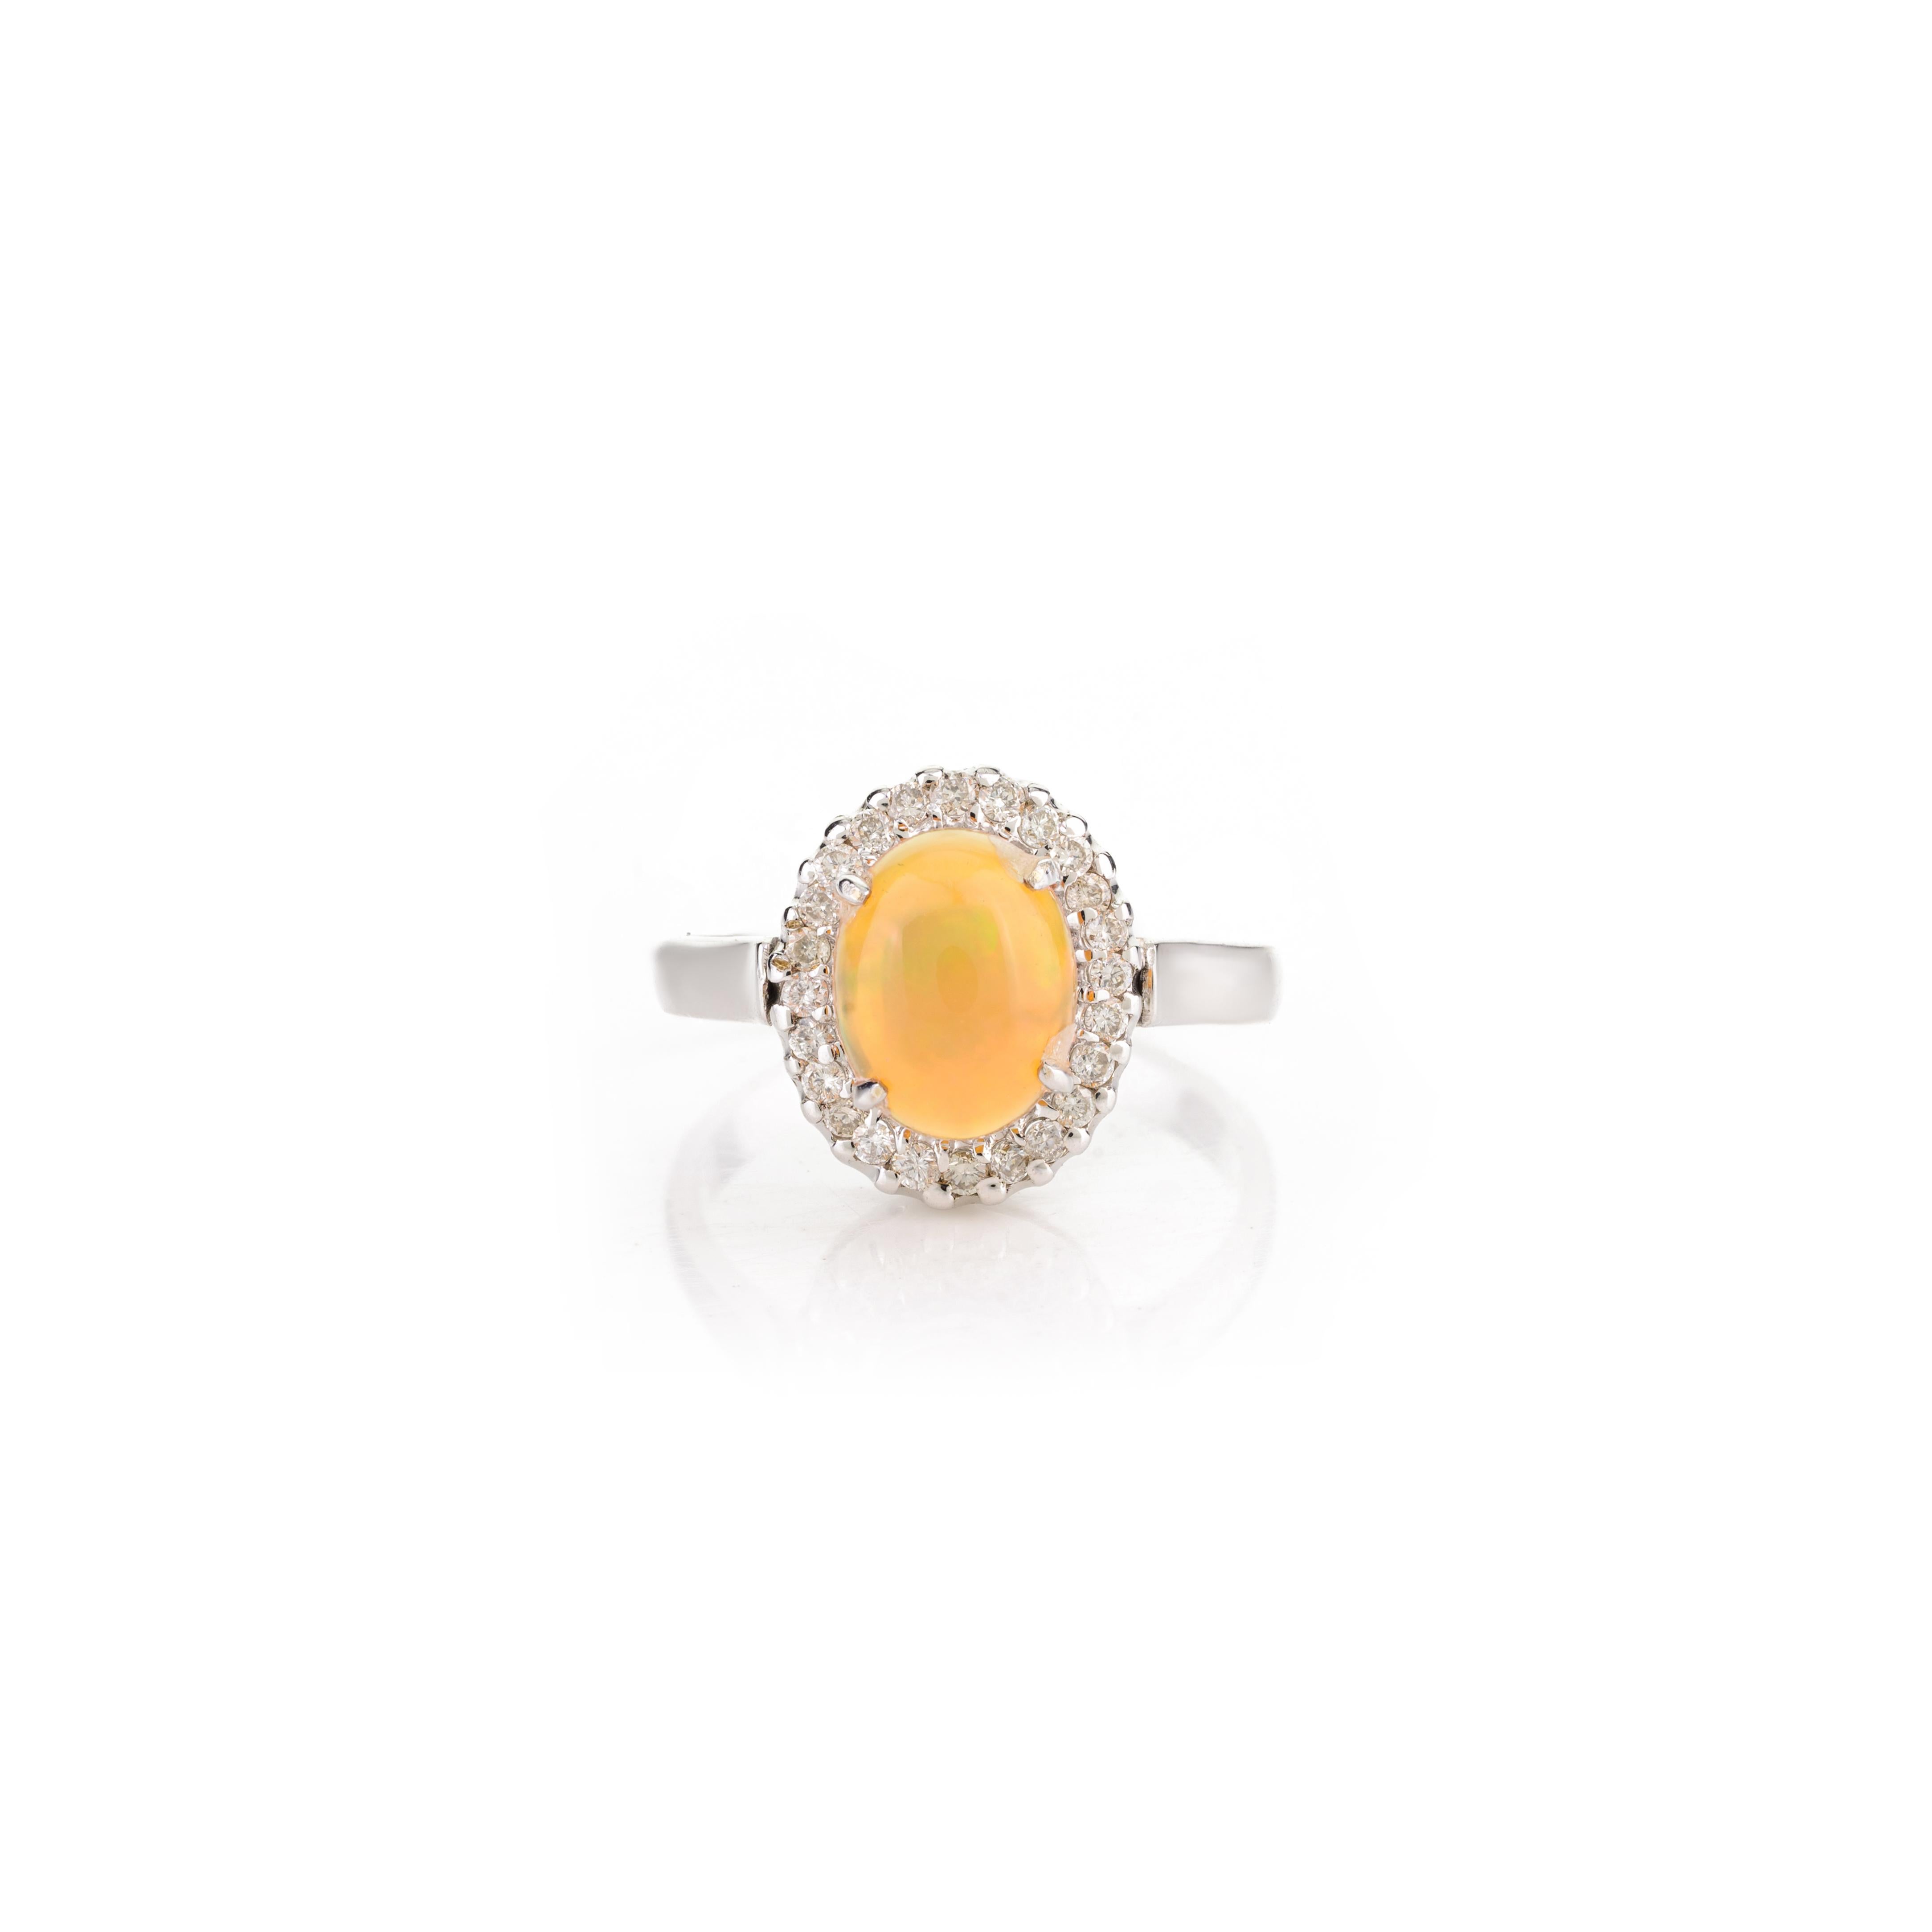 For Sale:  Natural Opal and Halo Diamond Wedding Ring in 18k Solid White Gold 7